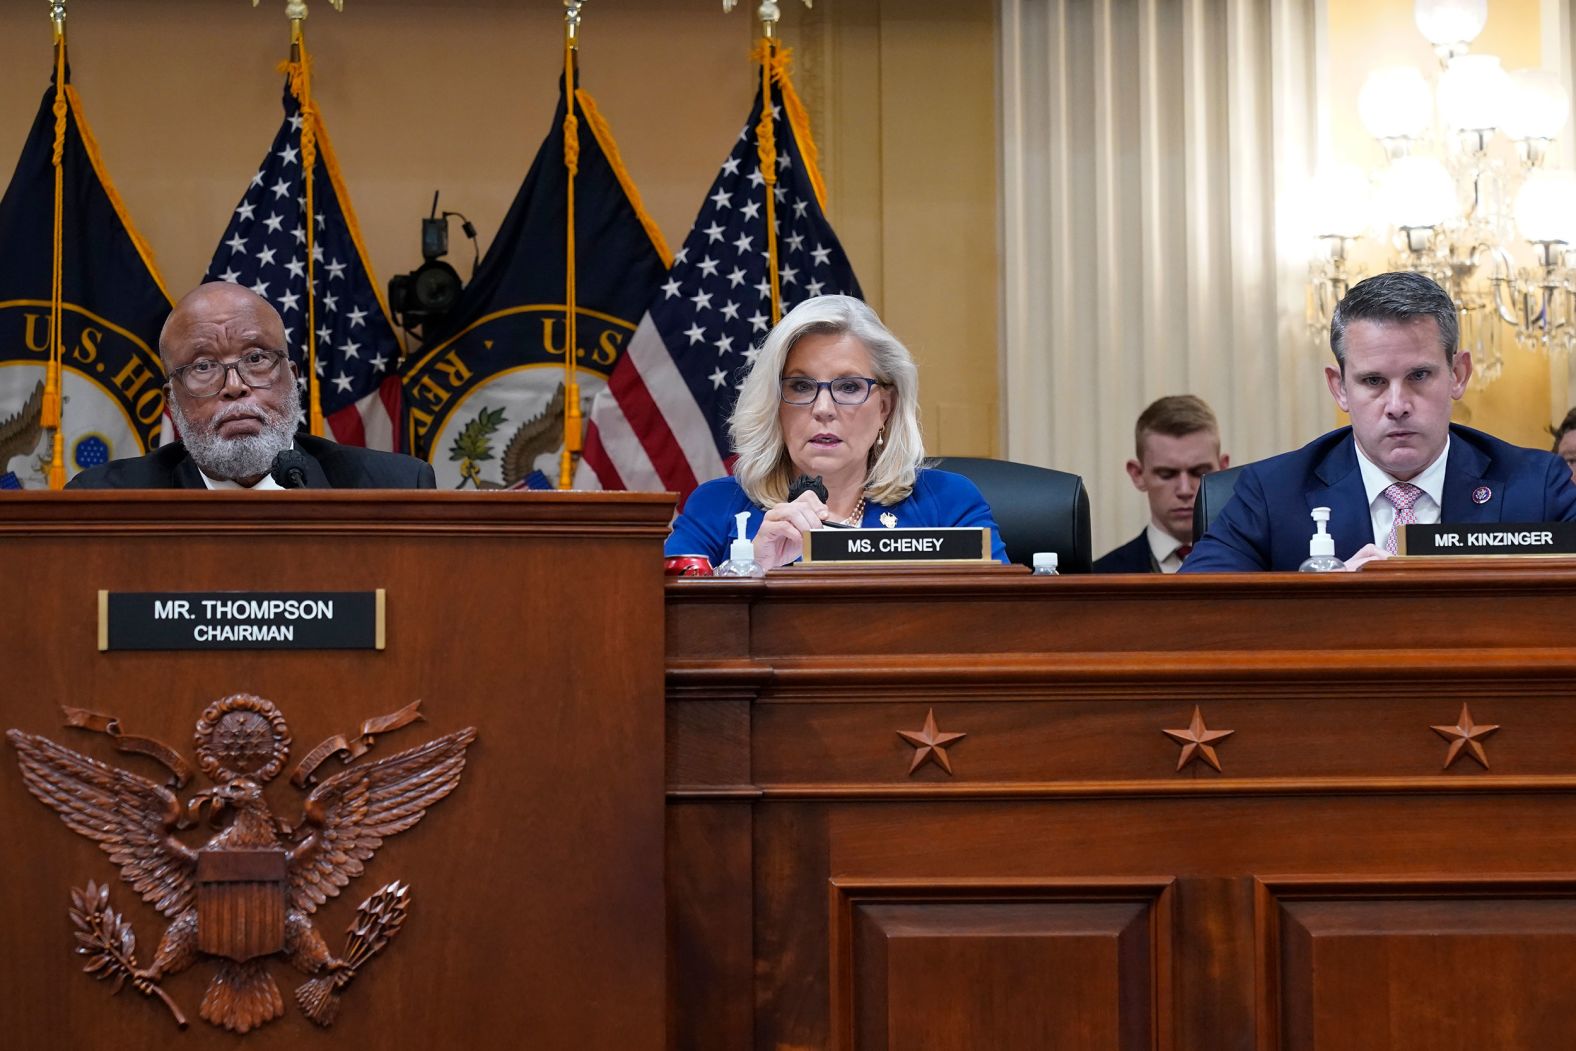 US Rep. Liz Cheney, the committee's vice chairwoman, offers a motion <a href="index.php?page=&url=https%3A%2F%2Fwww.cnn.com%2F2022%2F10%2F13%2Fpolitics%2Fsubpoena-trump-january-6-committee%2Findex.html" target="_blank">to subpoena former President Donald Trump</a> on October 13.